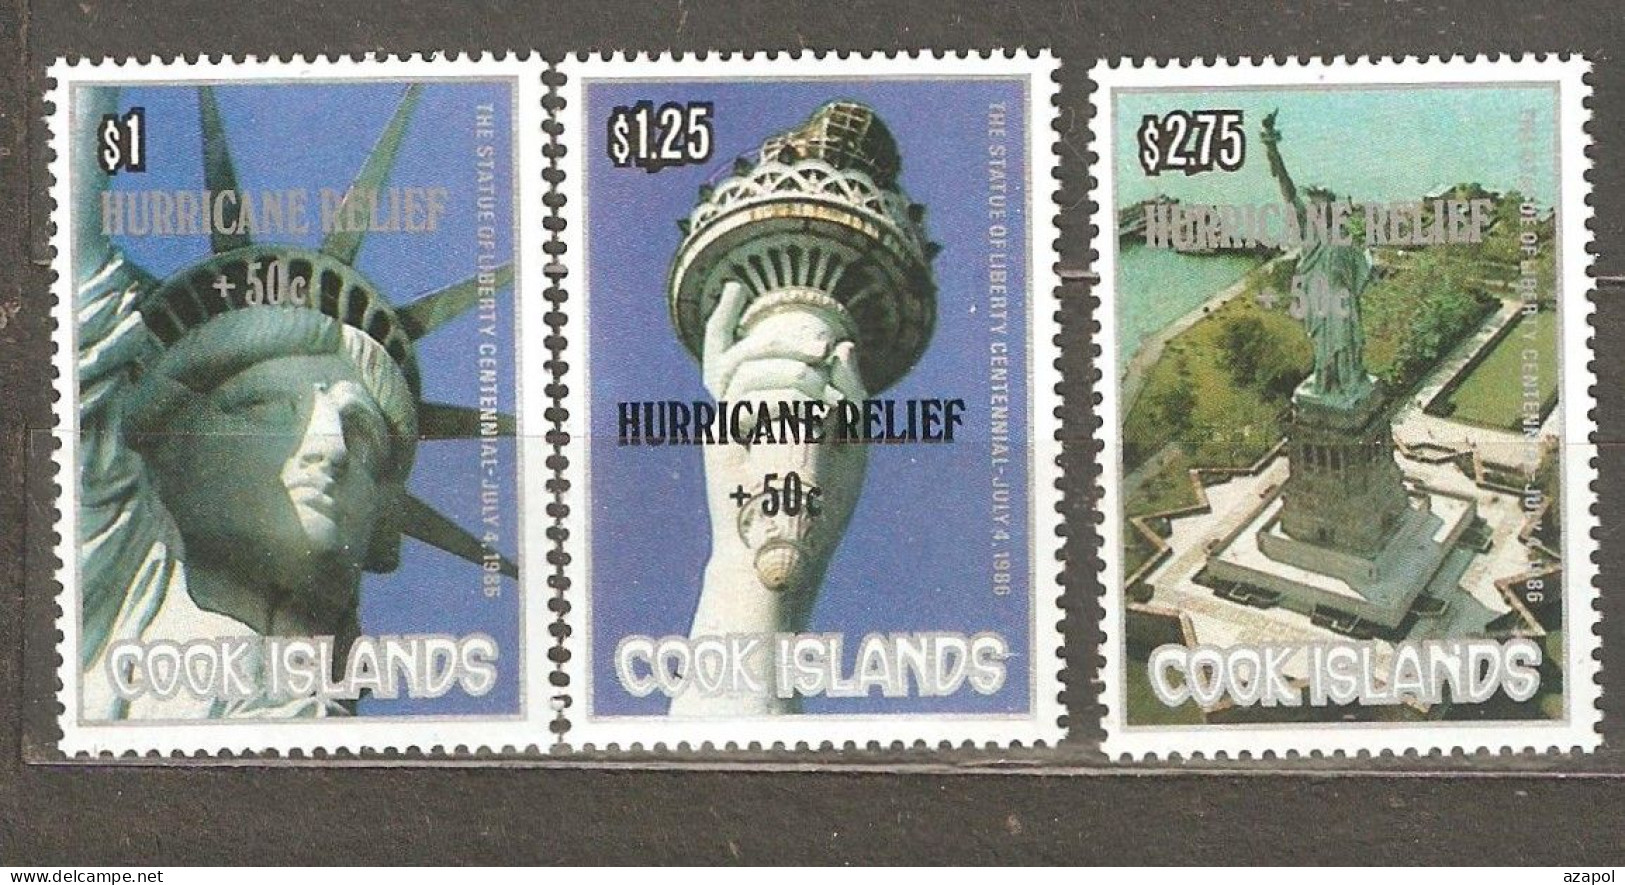 Cook Islands: Full Set Of 3 Mint Stamps - Overprint, 100 Years Of Statue Of Liberty, 1987, Mi#1220-2, MNH. - Cook Islands